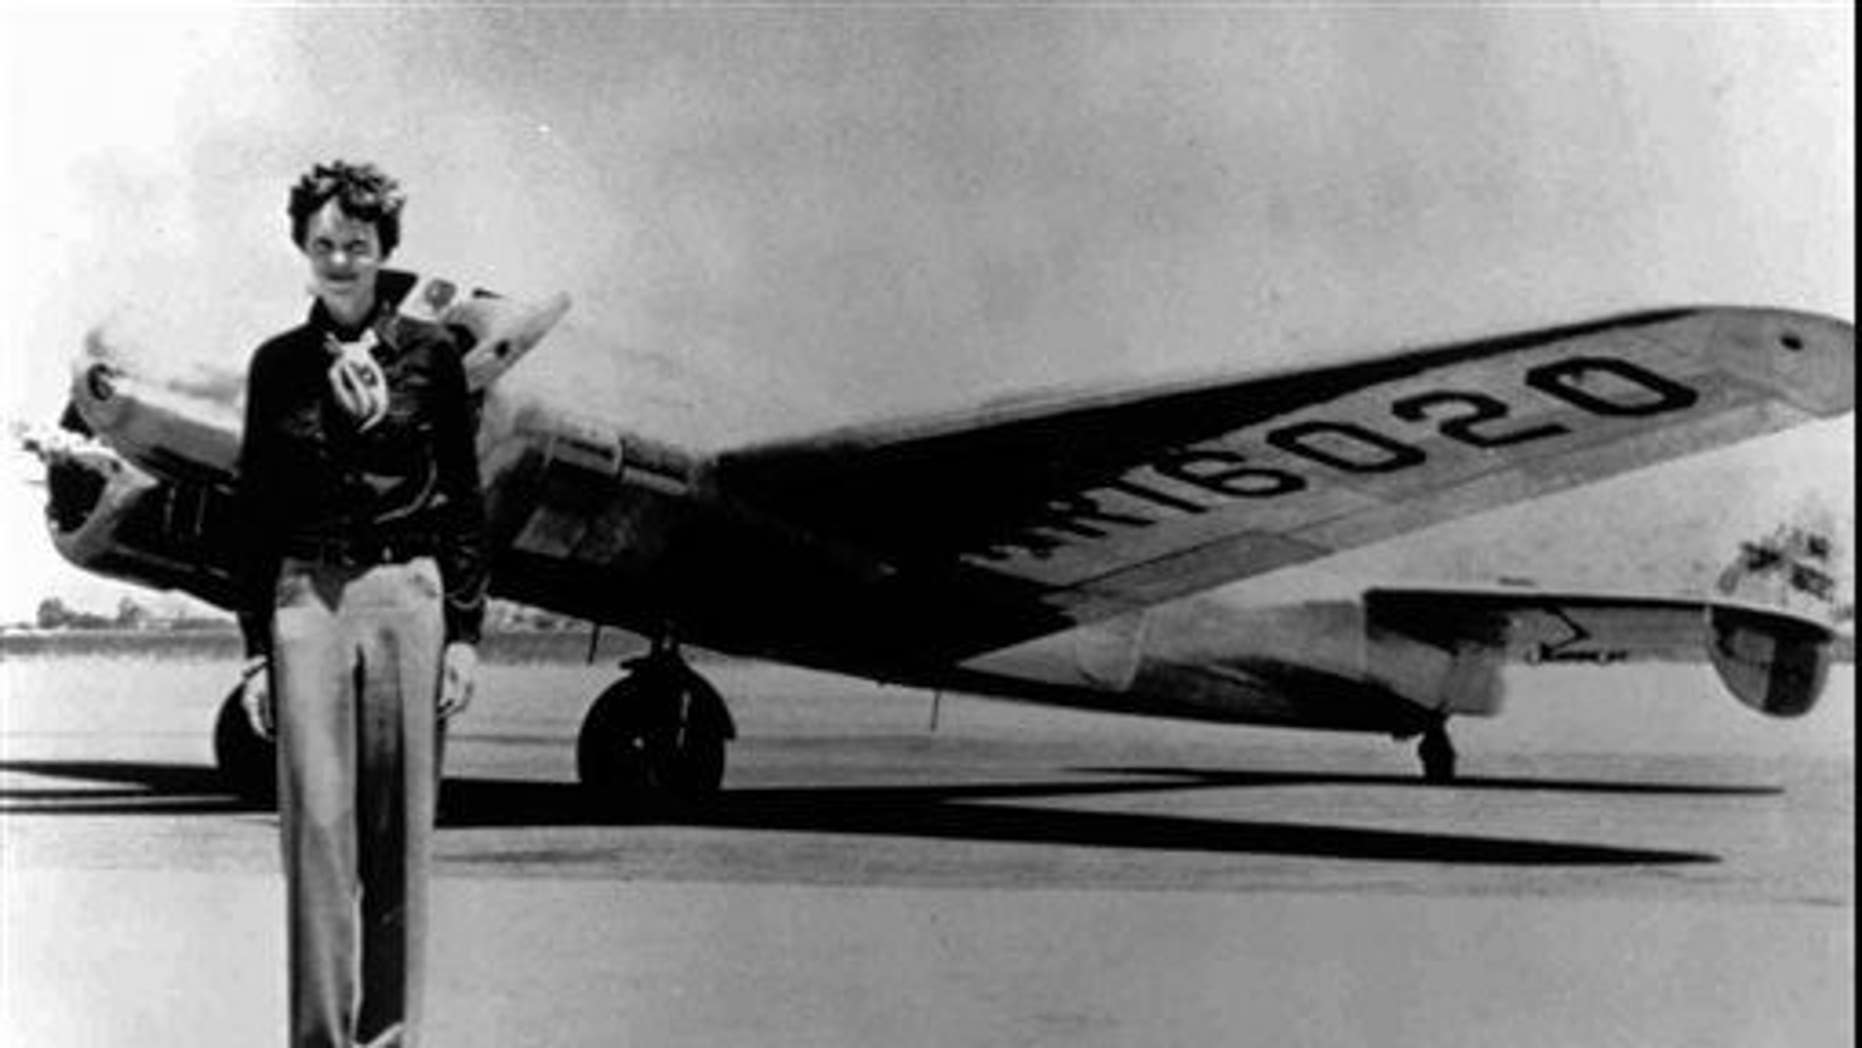 Amelia Earhart's plane discovered in old movie | Fox News